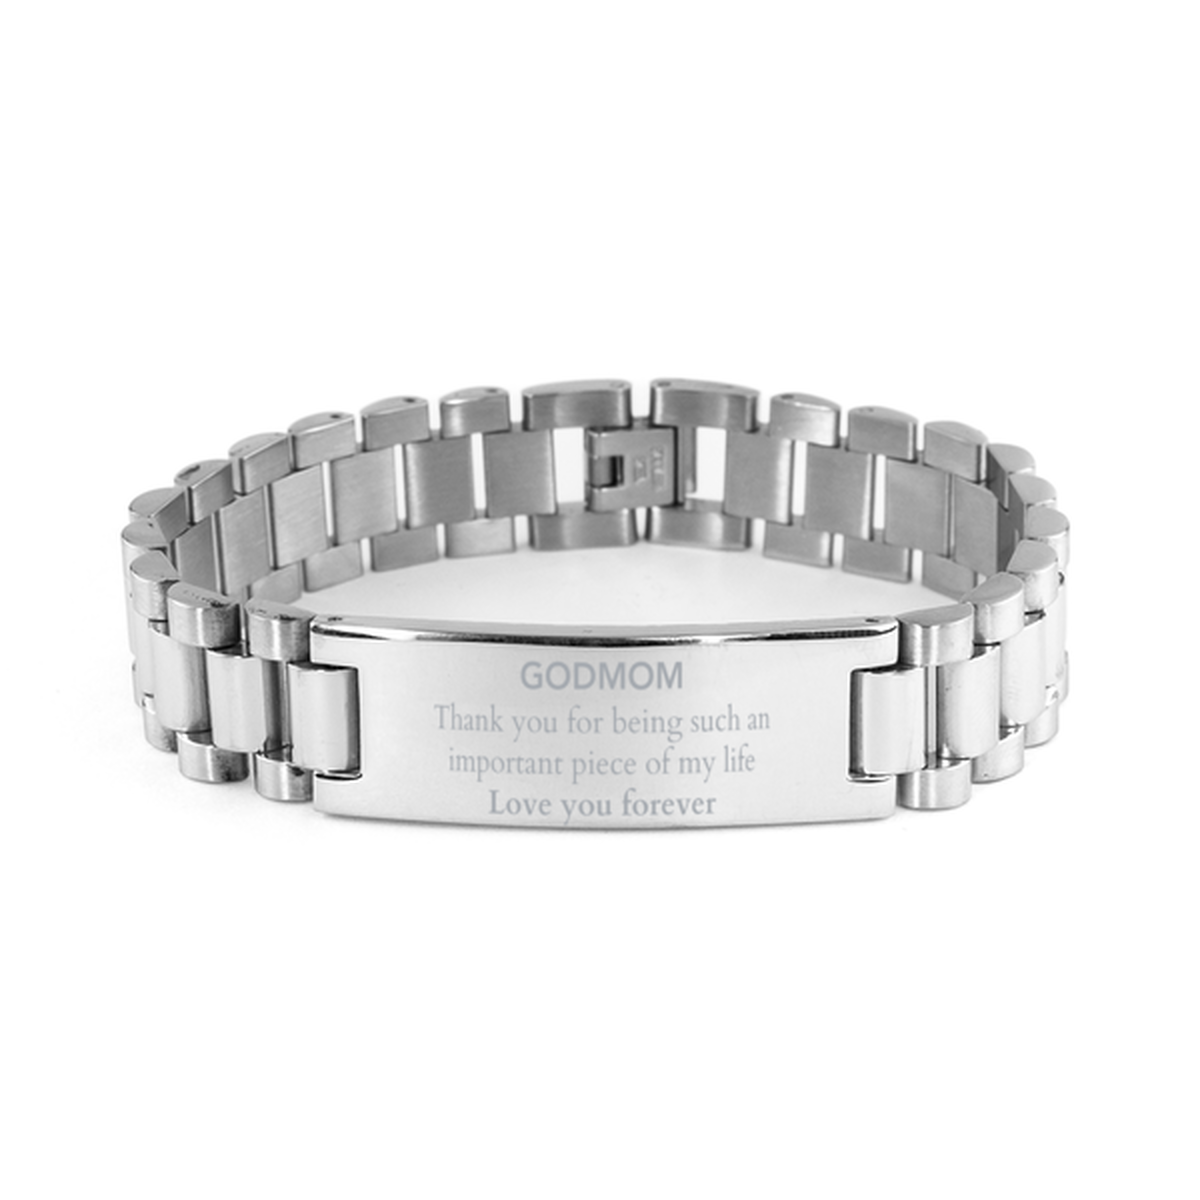 Appropriate Godmom Ladder Stainless Steel Bracelet Epic Birthday Gifts for Godmom Thank you for being such an important piece of my life Godmom Christmas Mothers Fathers Day